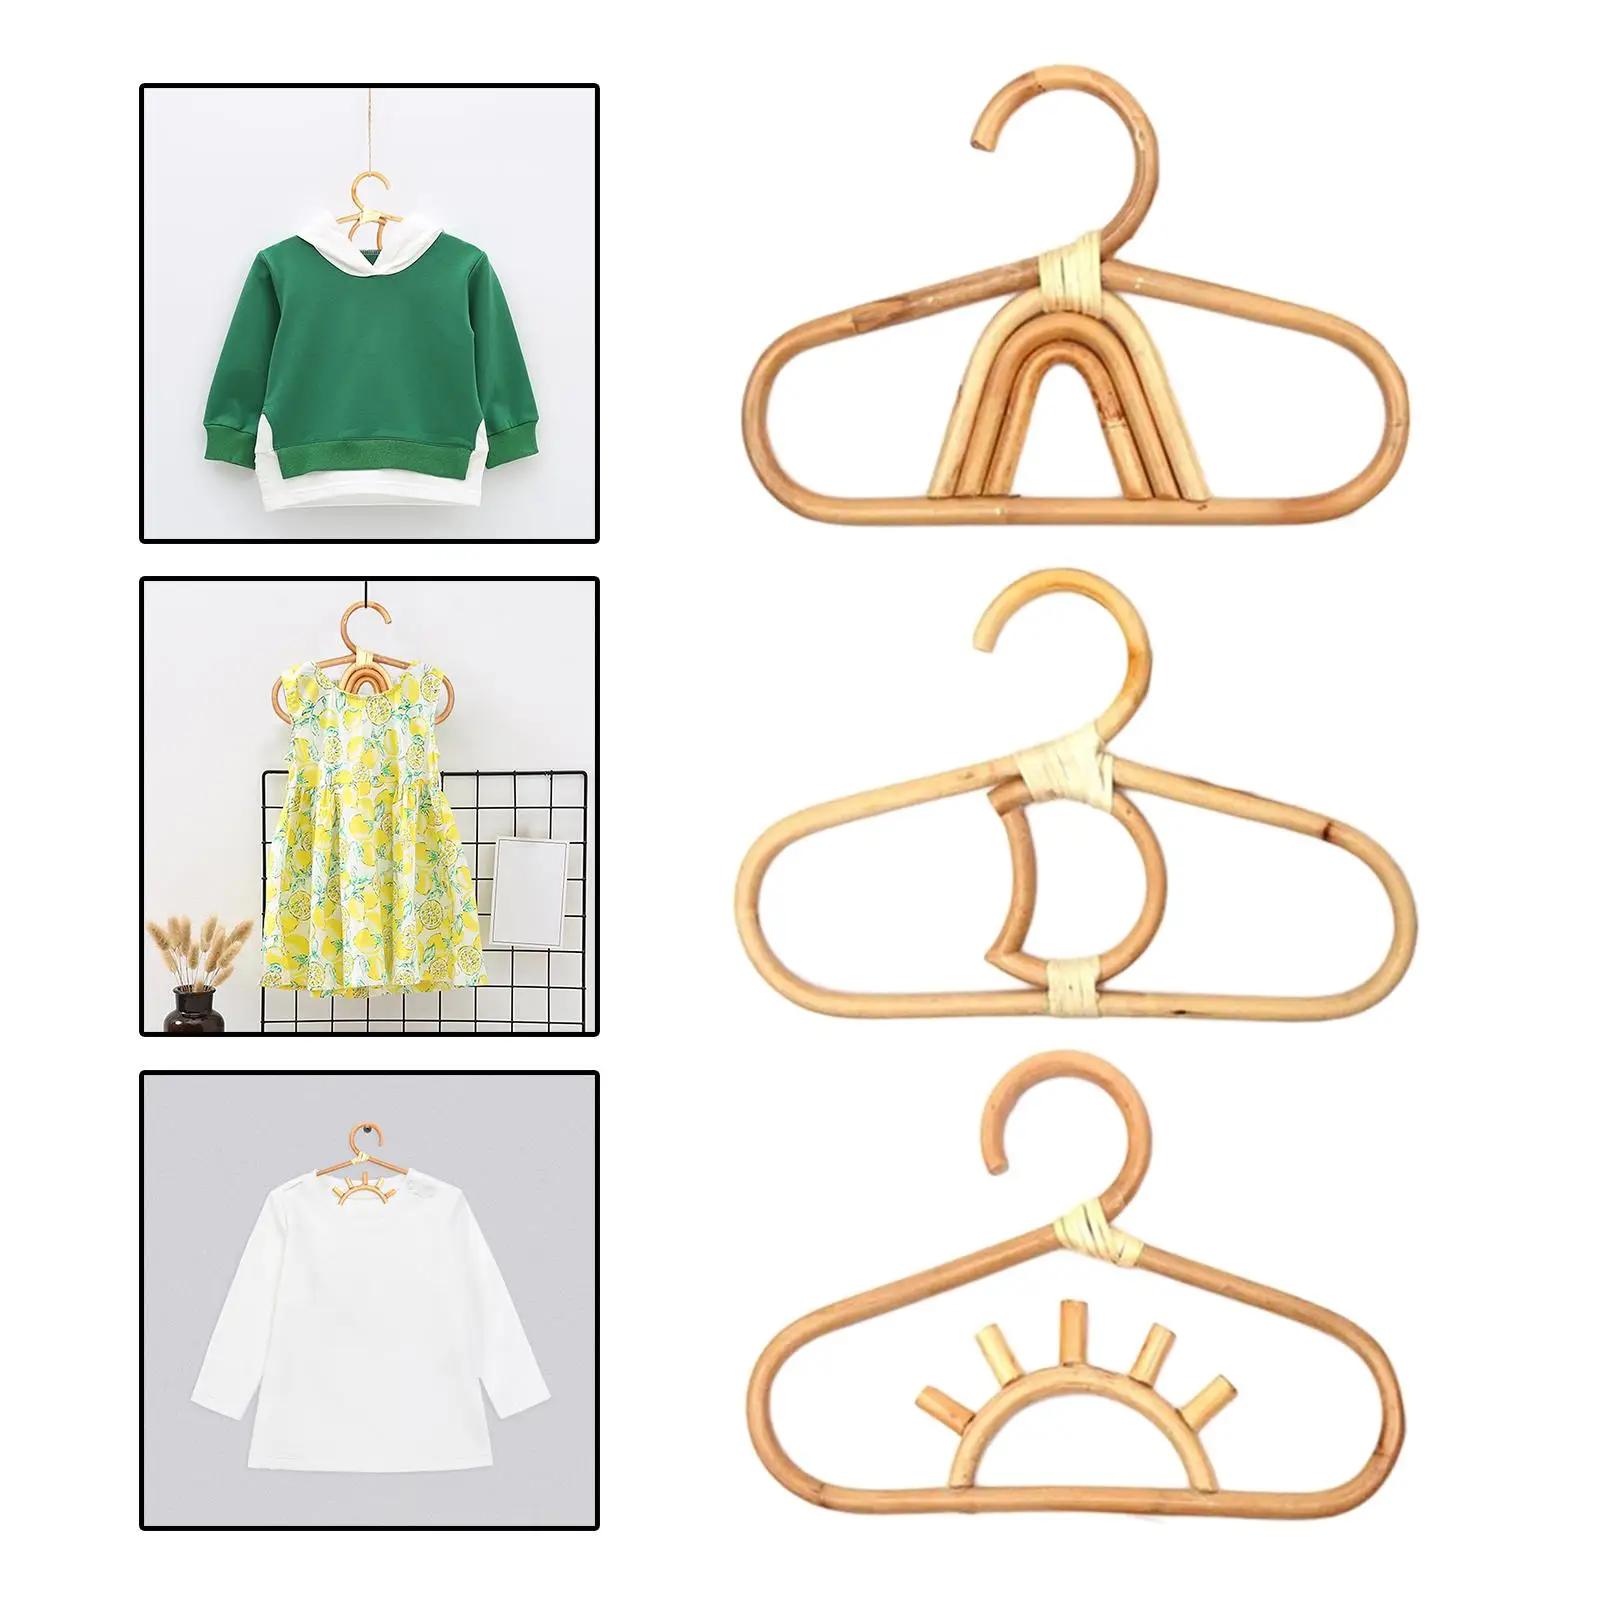 3 Pcs Kids Clothes Hanger Room Rattan Organizer Smooth Bamboo Coat Hangers Rack Clothes Hat Room Decor for Children Kids Baby